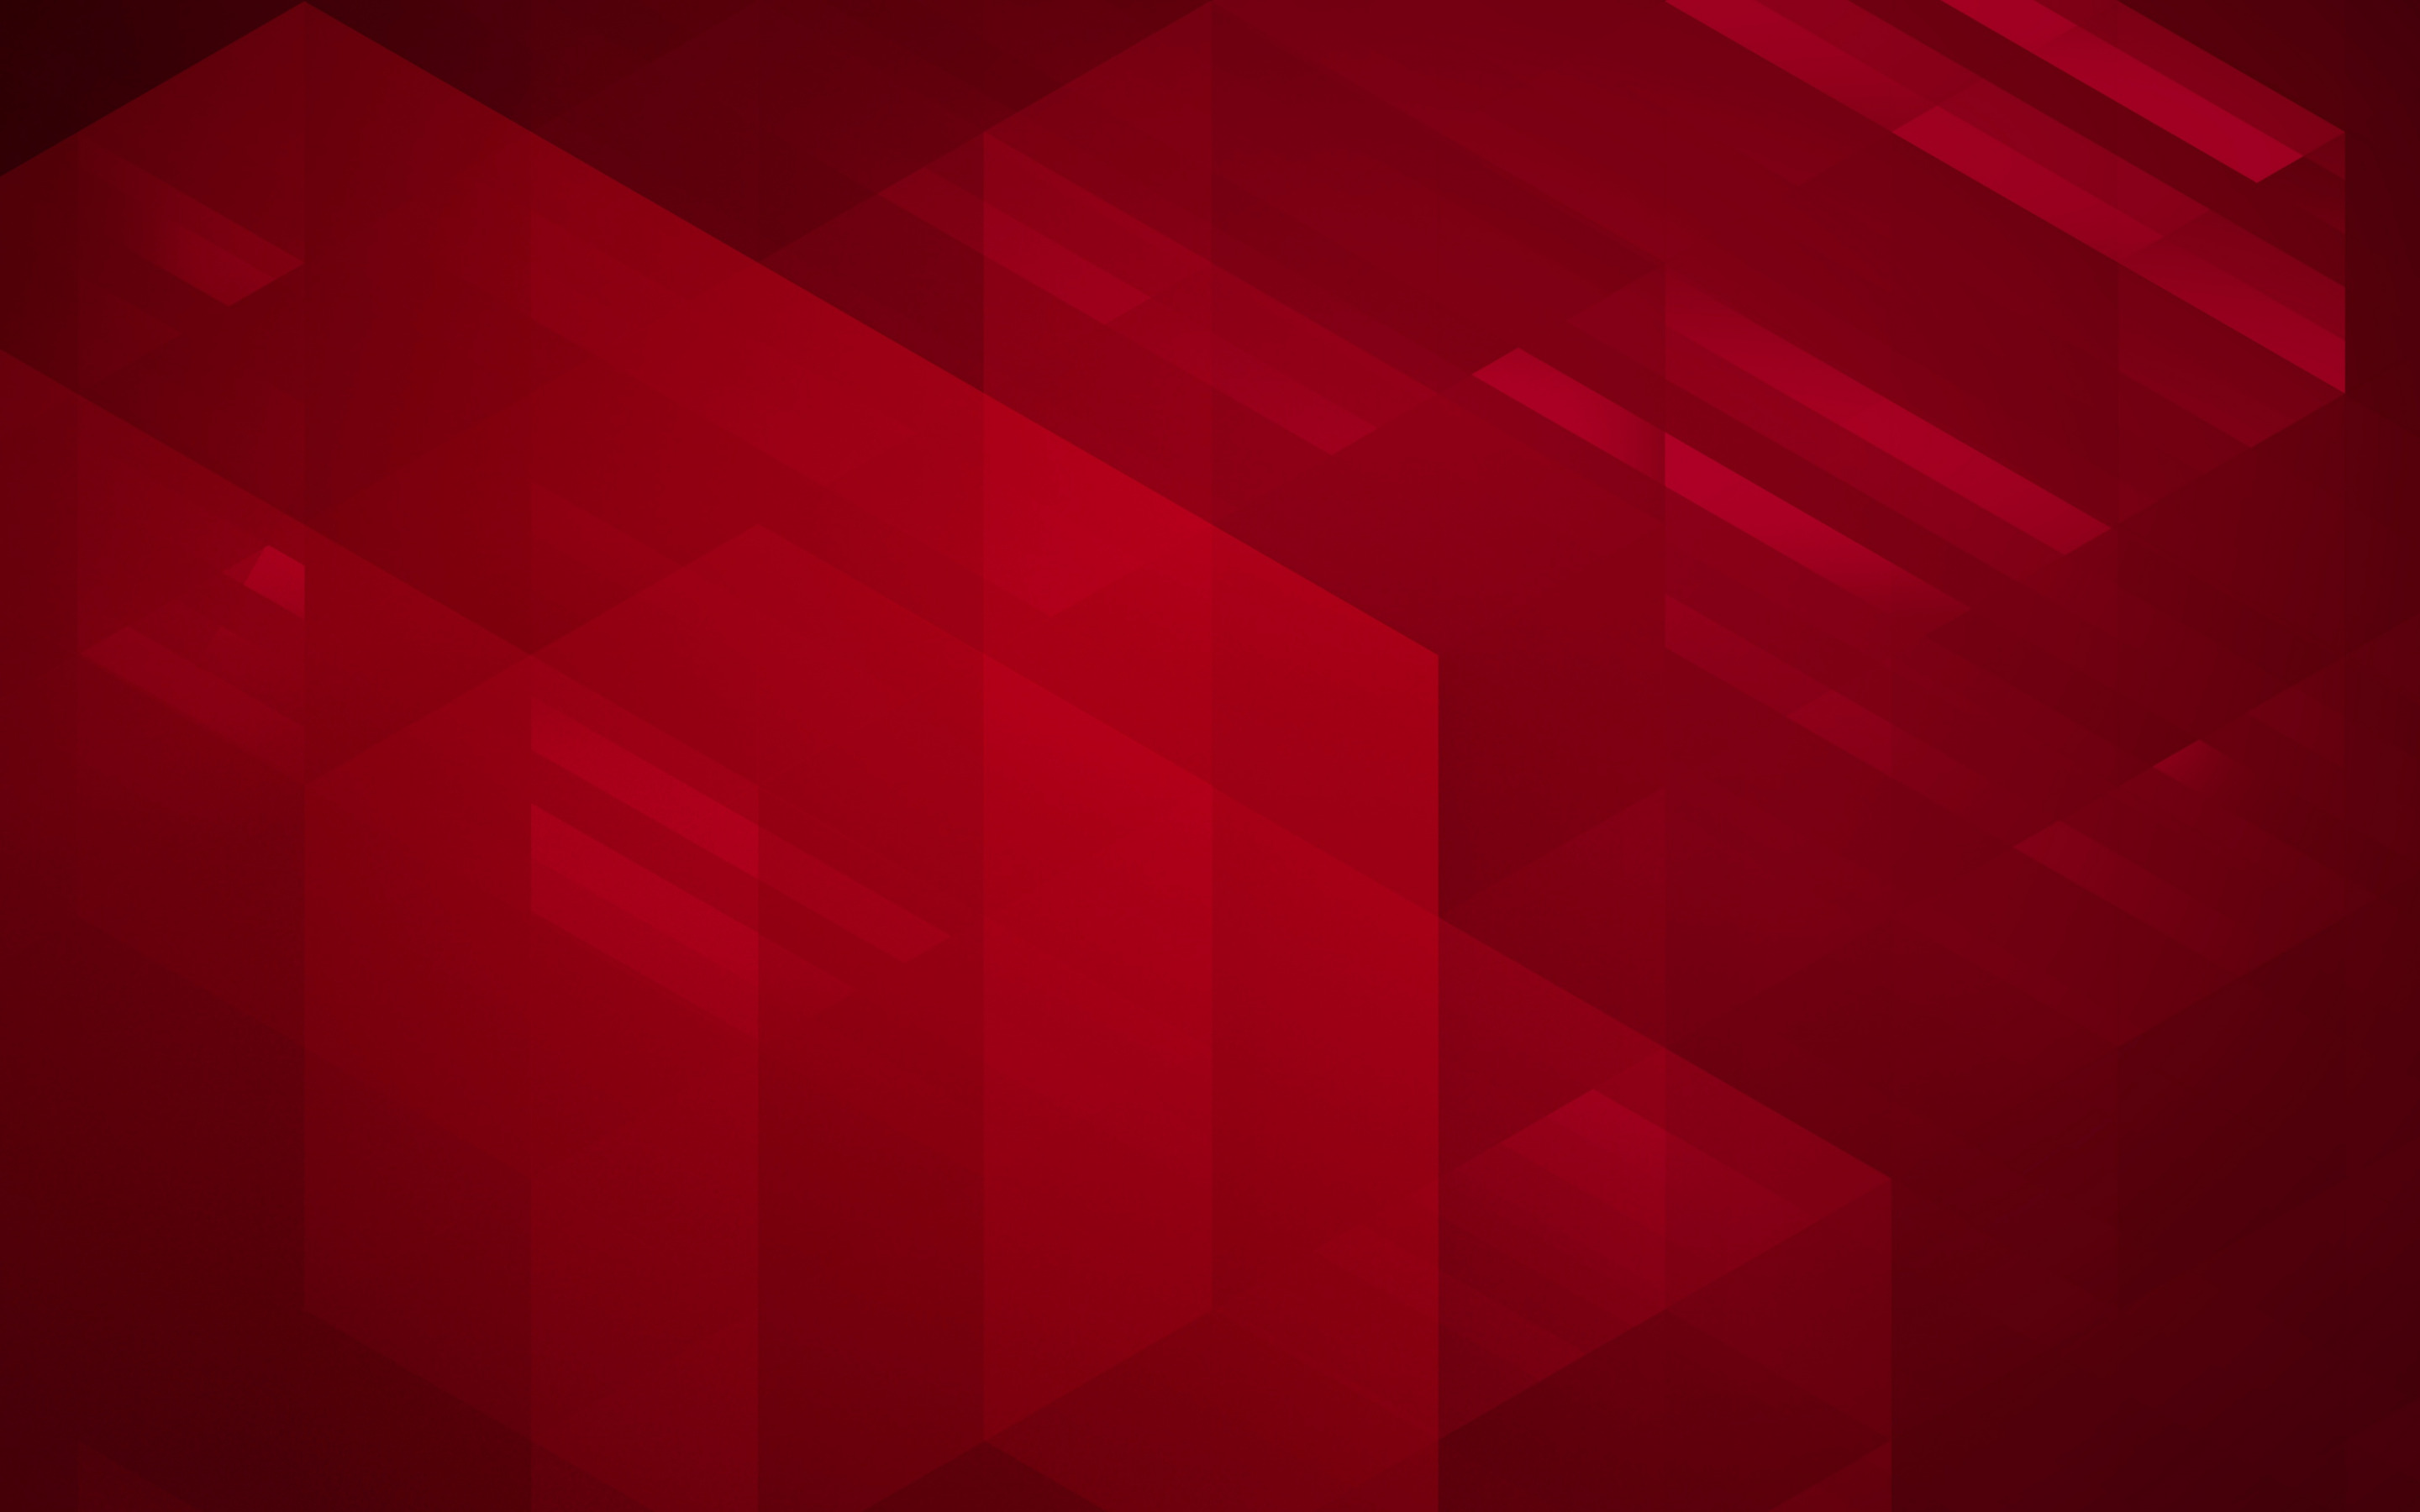 Download wallpapers dark red lines background, abstract red background,  creative red background, lines background for desktop with resolution  2880x1800. High Quality HD pictures wallpapers